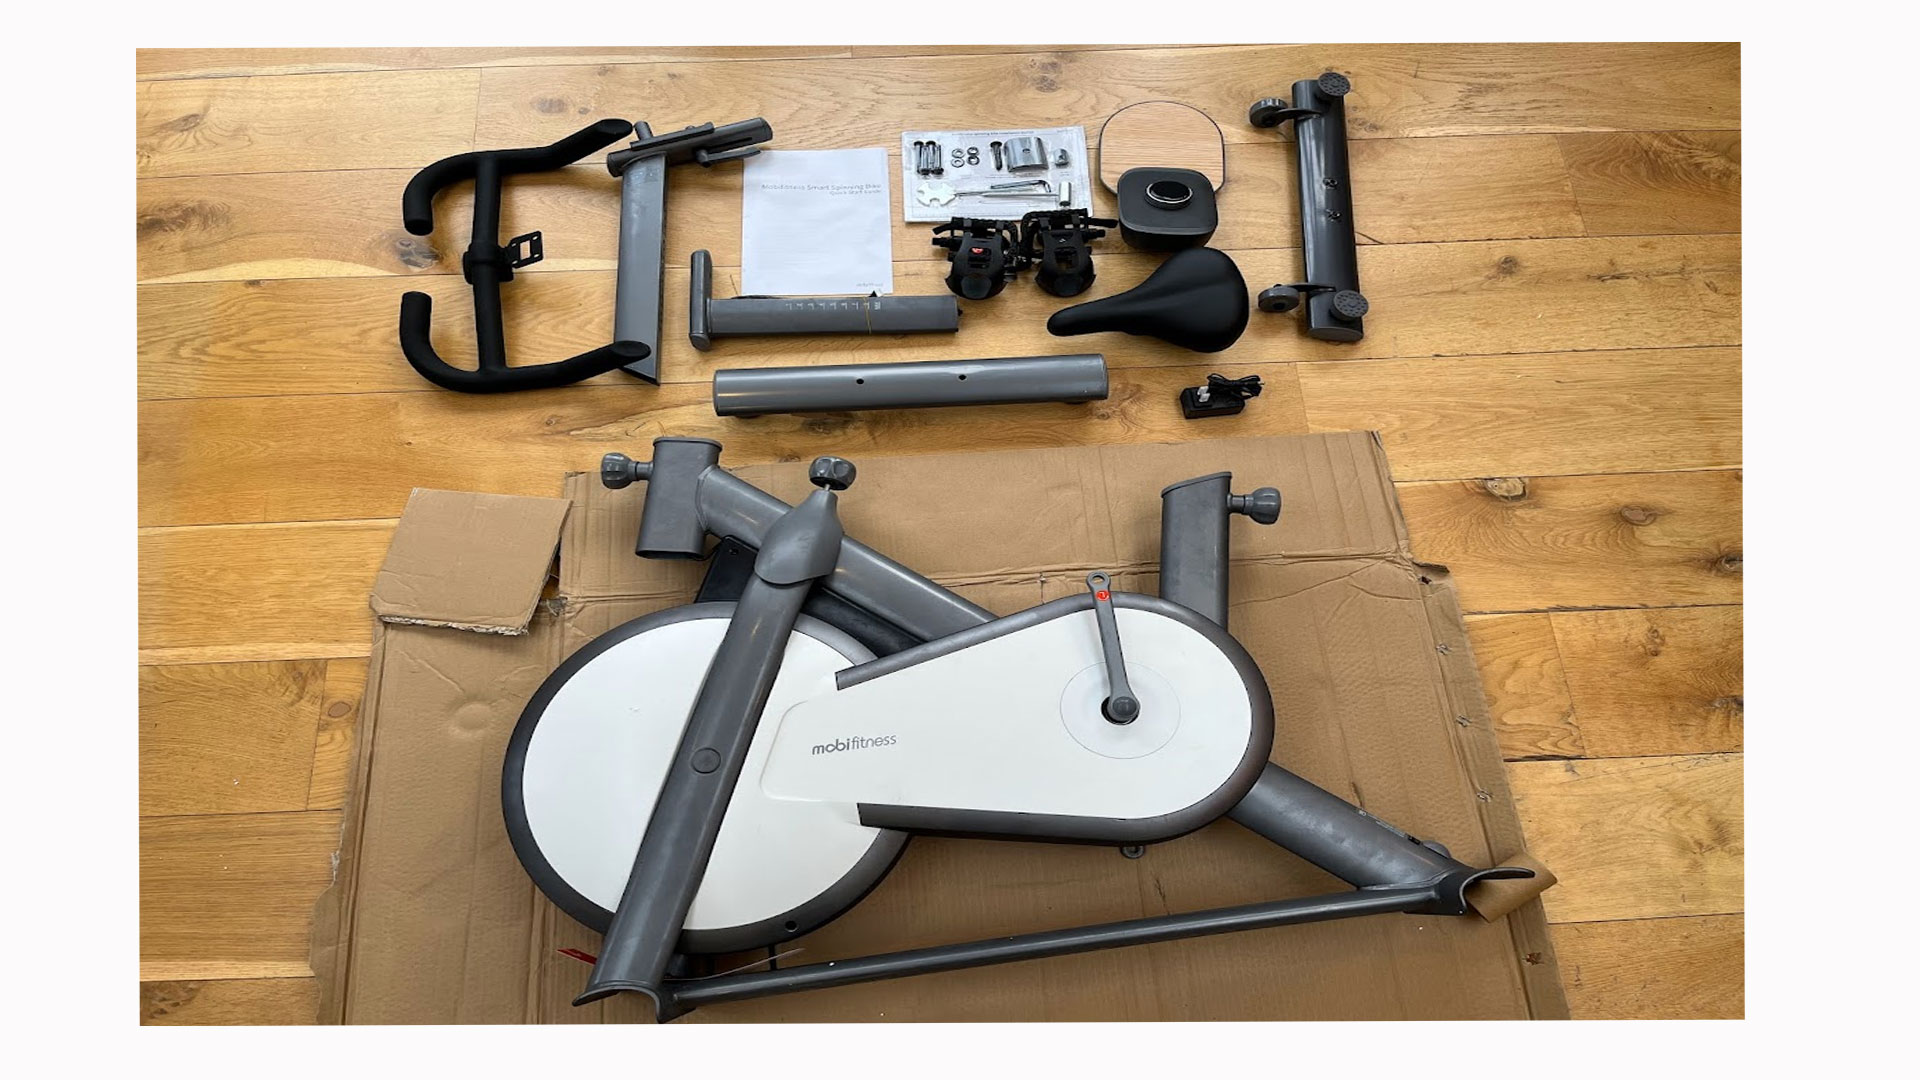 The image shows the Mobi Turbo exercise bike in parts.